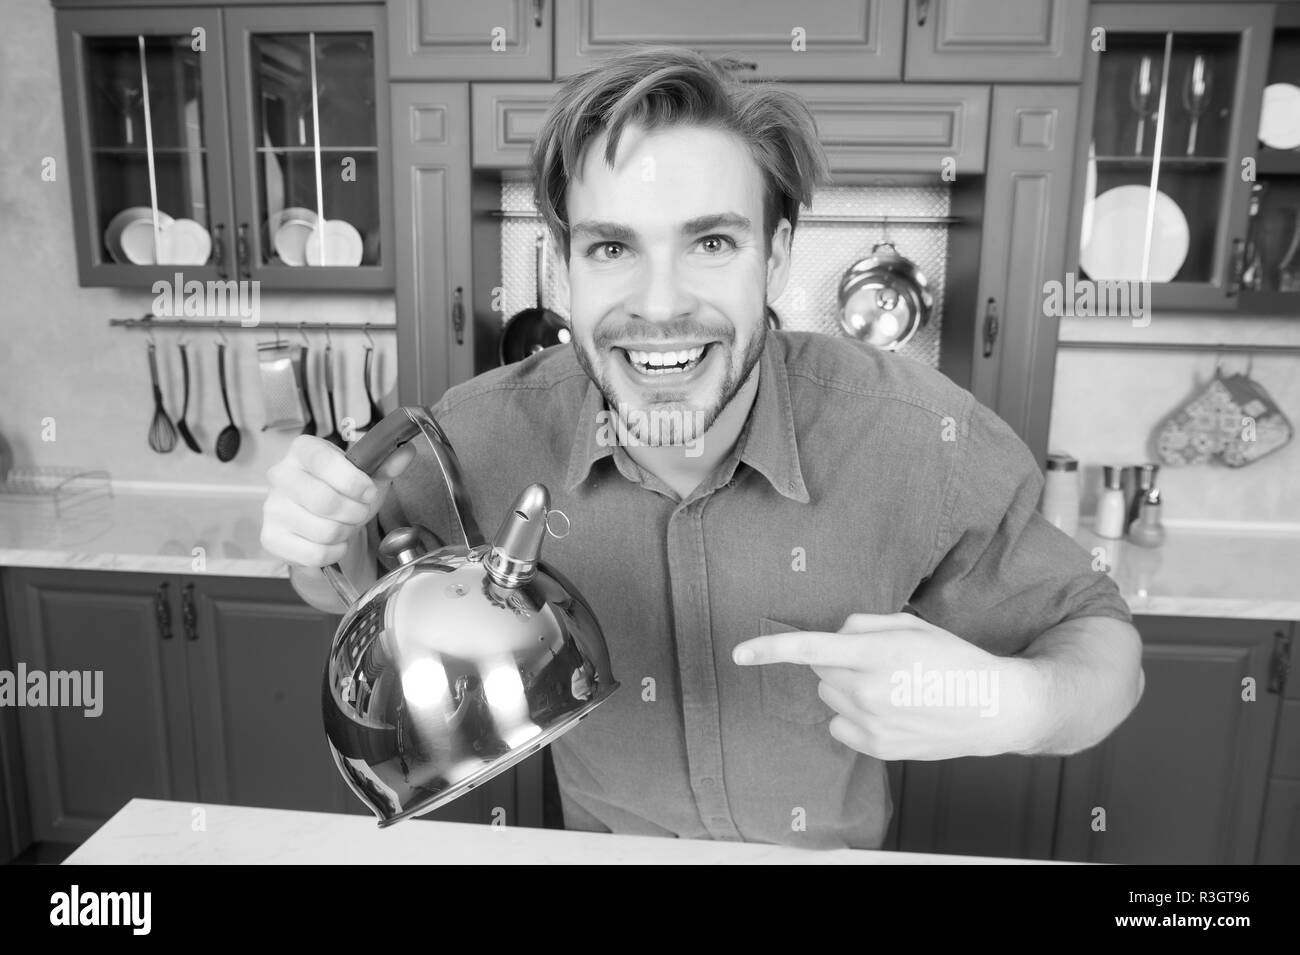 Happy man in blue shirt point finger at kettle. Kitchen appliance and furniture. Food preparation, cooking, heating, boiling water. Tea time, tea mood Stock Photo